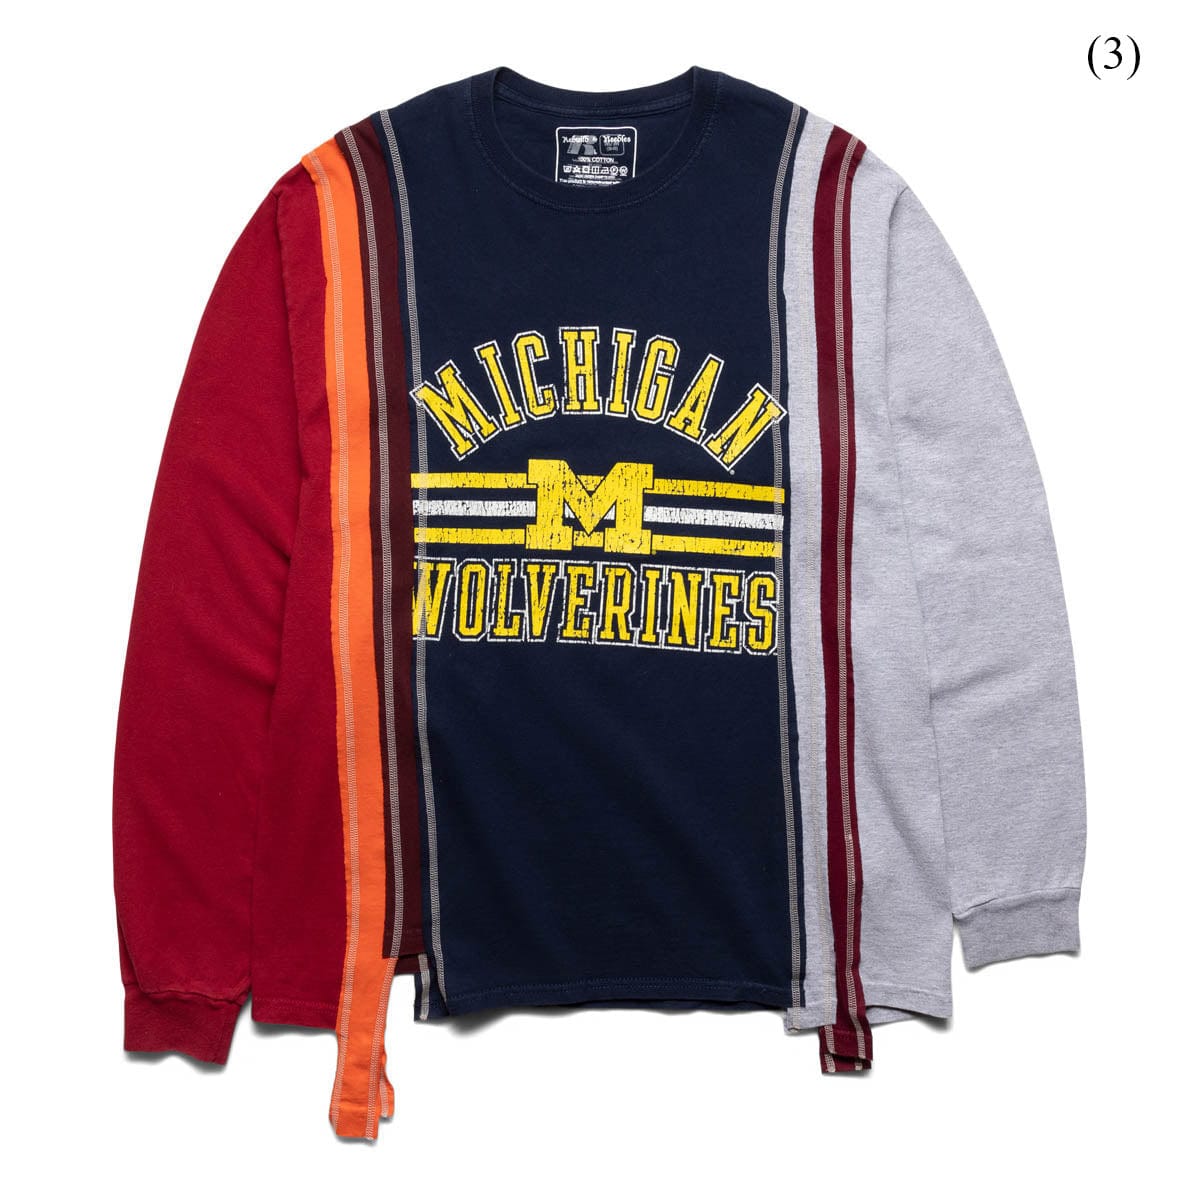 Needles 7 CUTS L/S TEE - Michigan COLLEGE SS22 (LARGE/MULTIPLE STYLES)